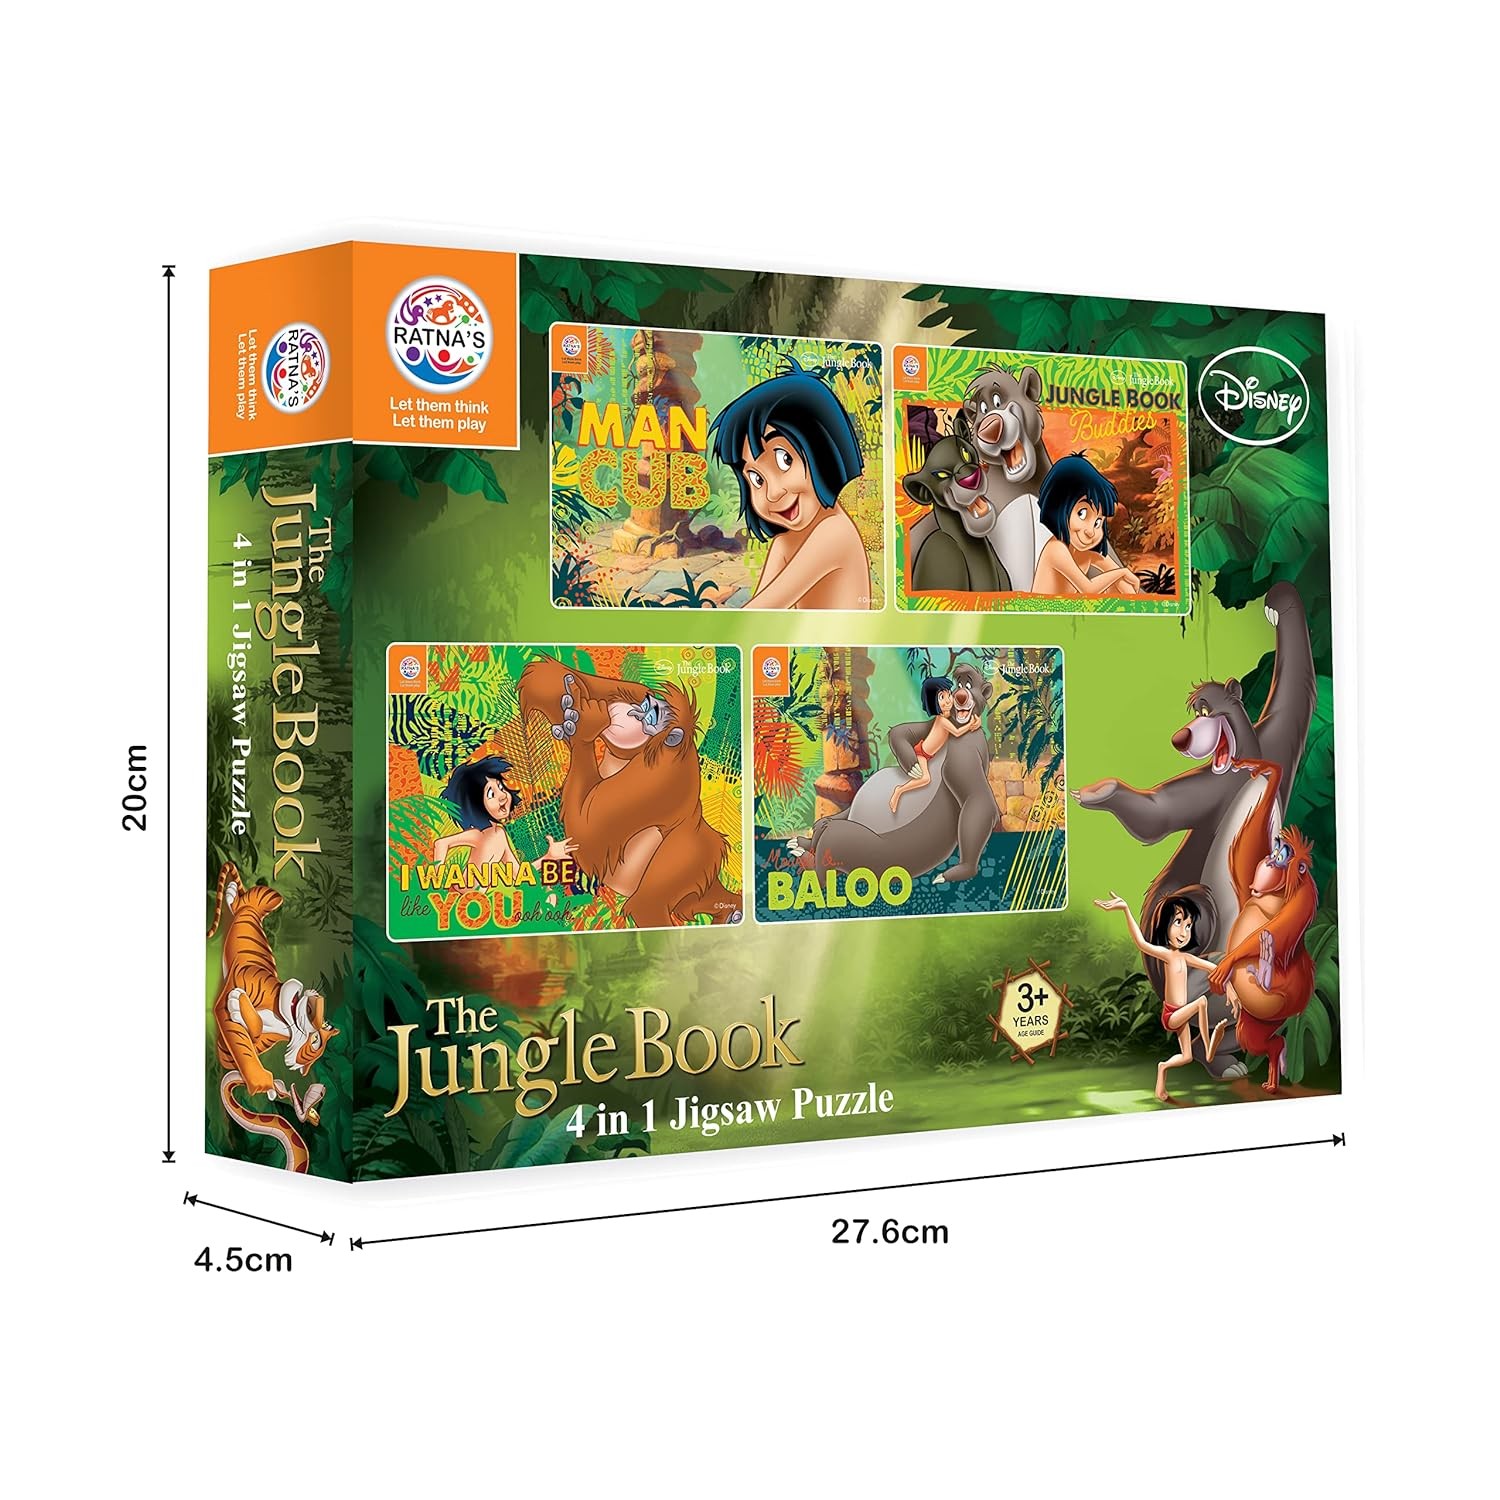 Ratna's 4 in 1 Disney Jigsaw Puzzle 140 Pieces for Kids. 4 Jigsaw Puzzles 35 Pieces Each (Jungle Book)…